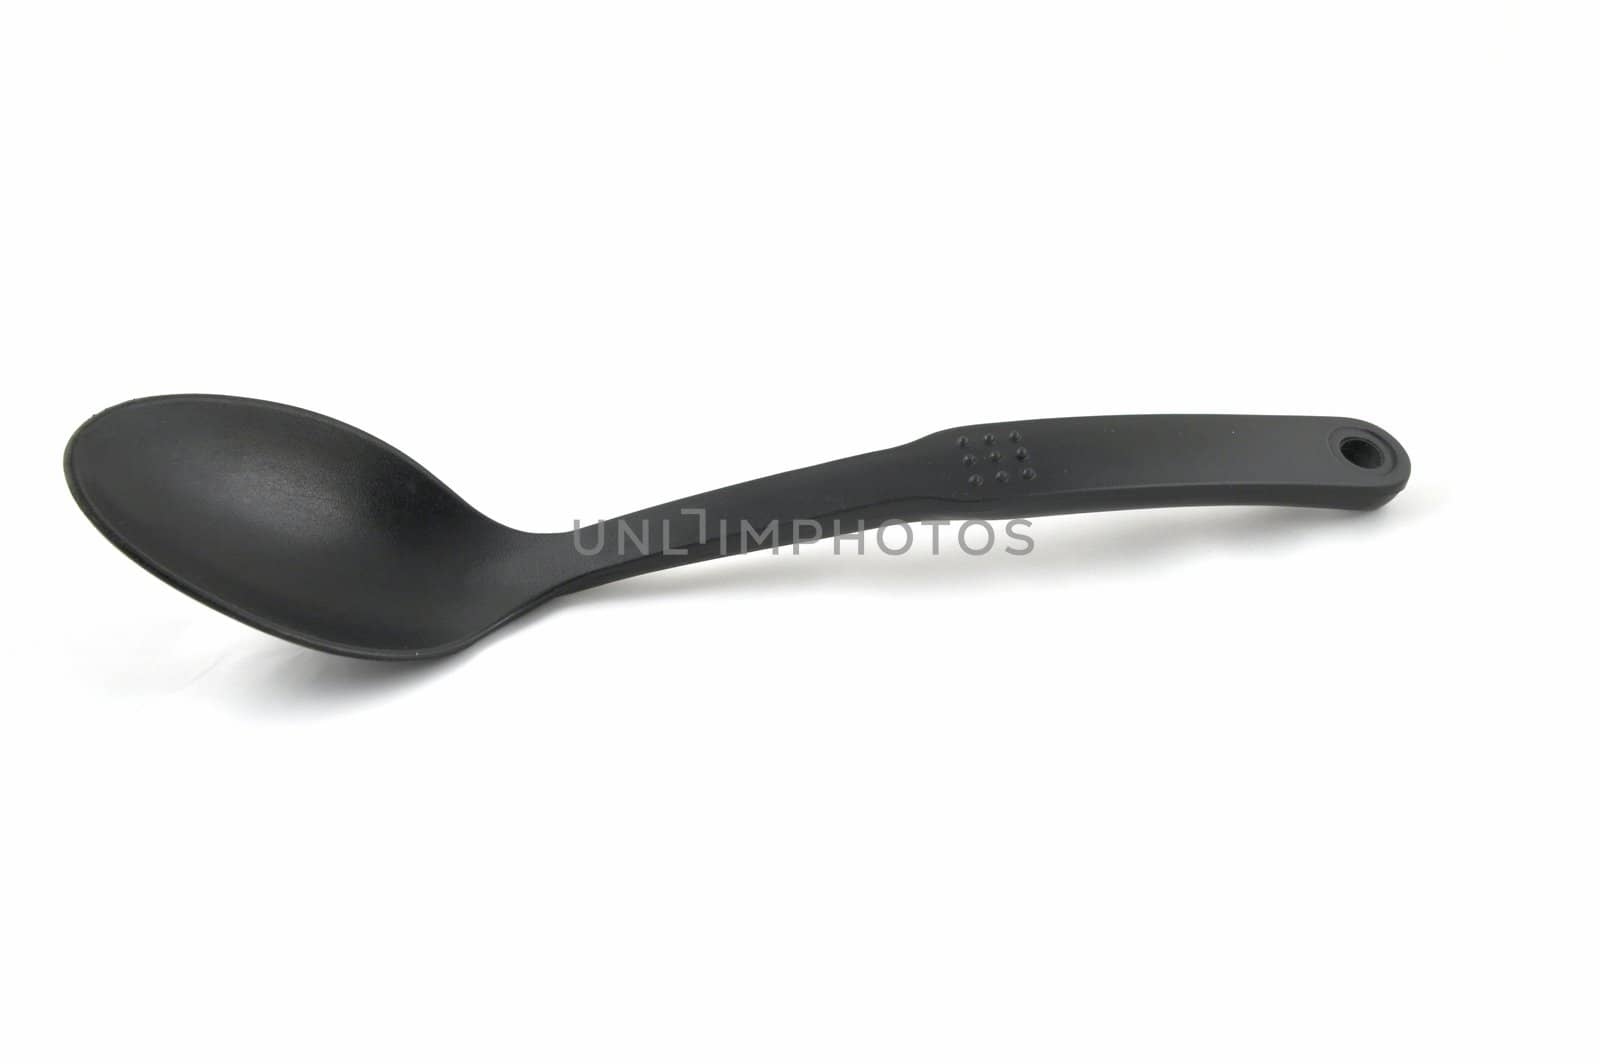 The greater spoon for soup on a white background